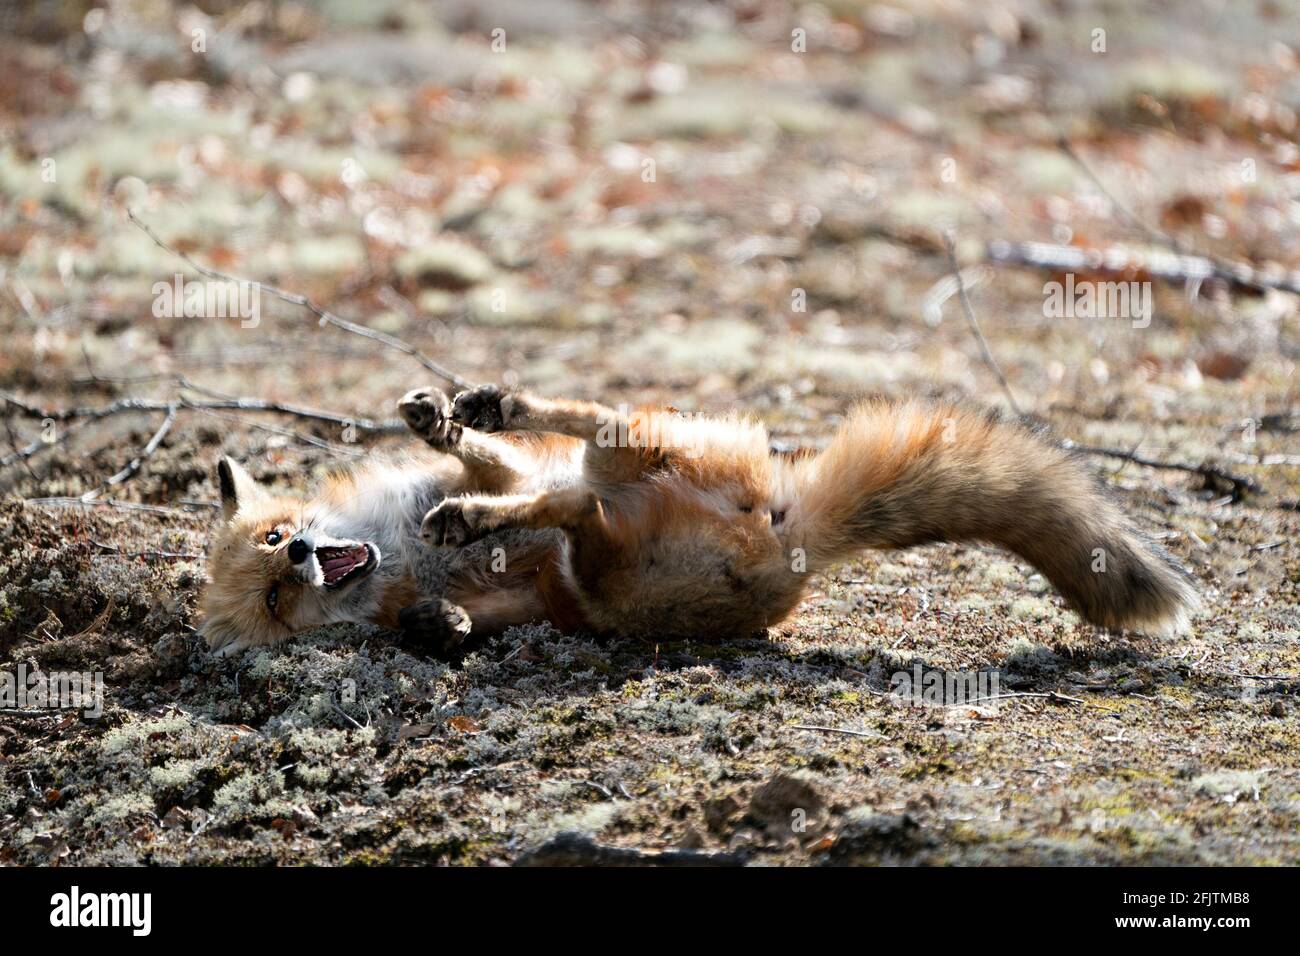 Red fox scratching back with a funny position displaying fox tail, fur, open mouth, and sun on its body in its environment and habitat with a blur bac Stock Photo